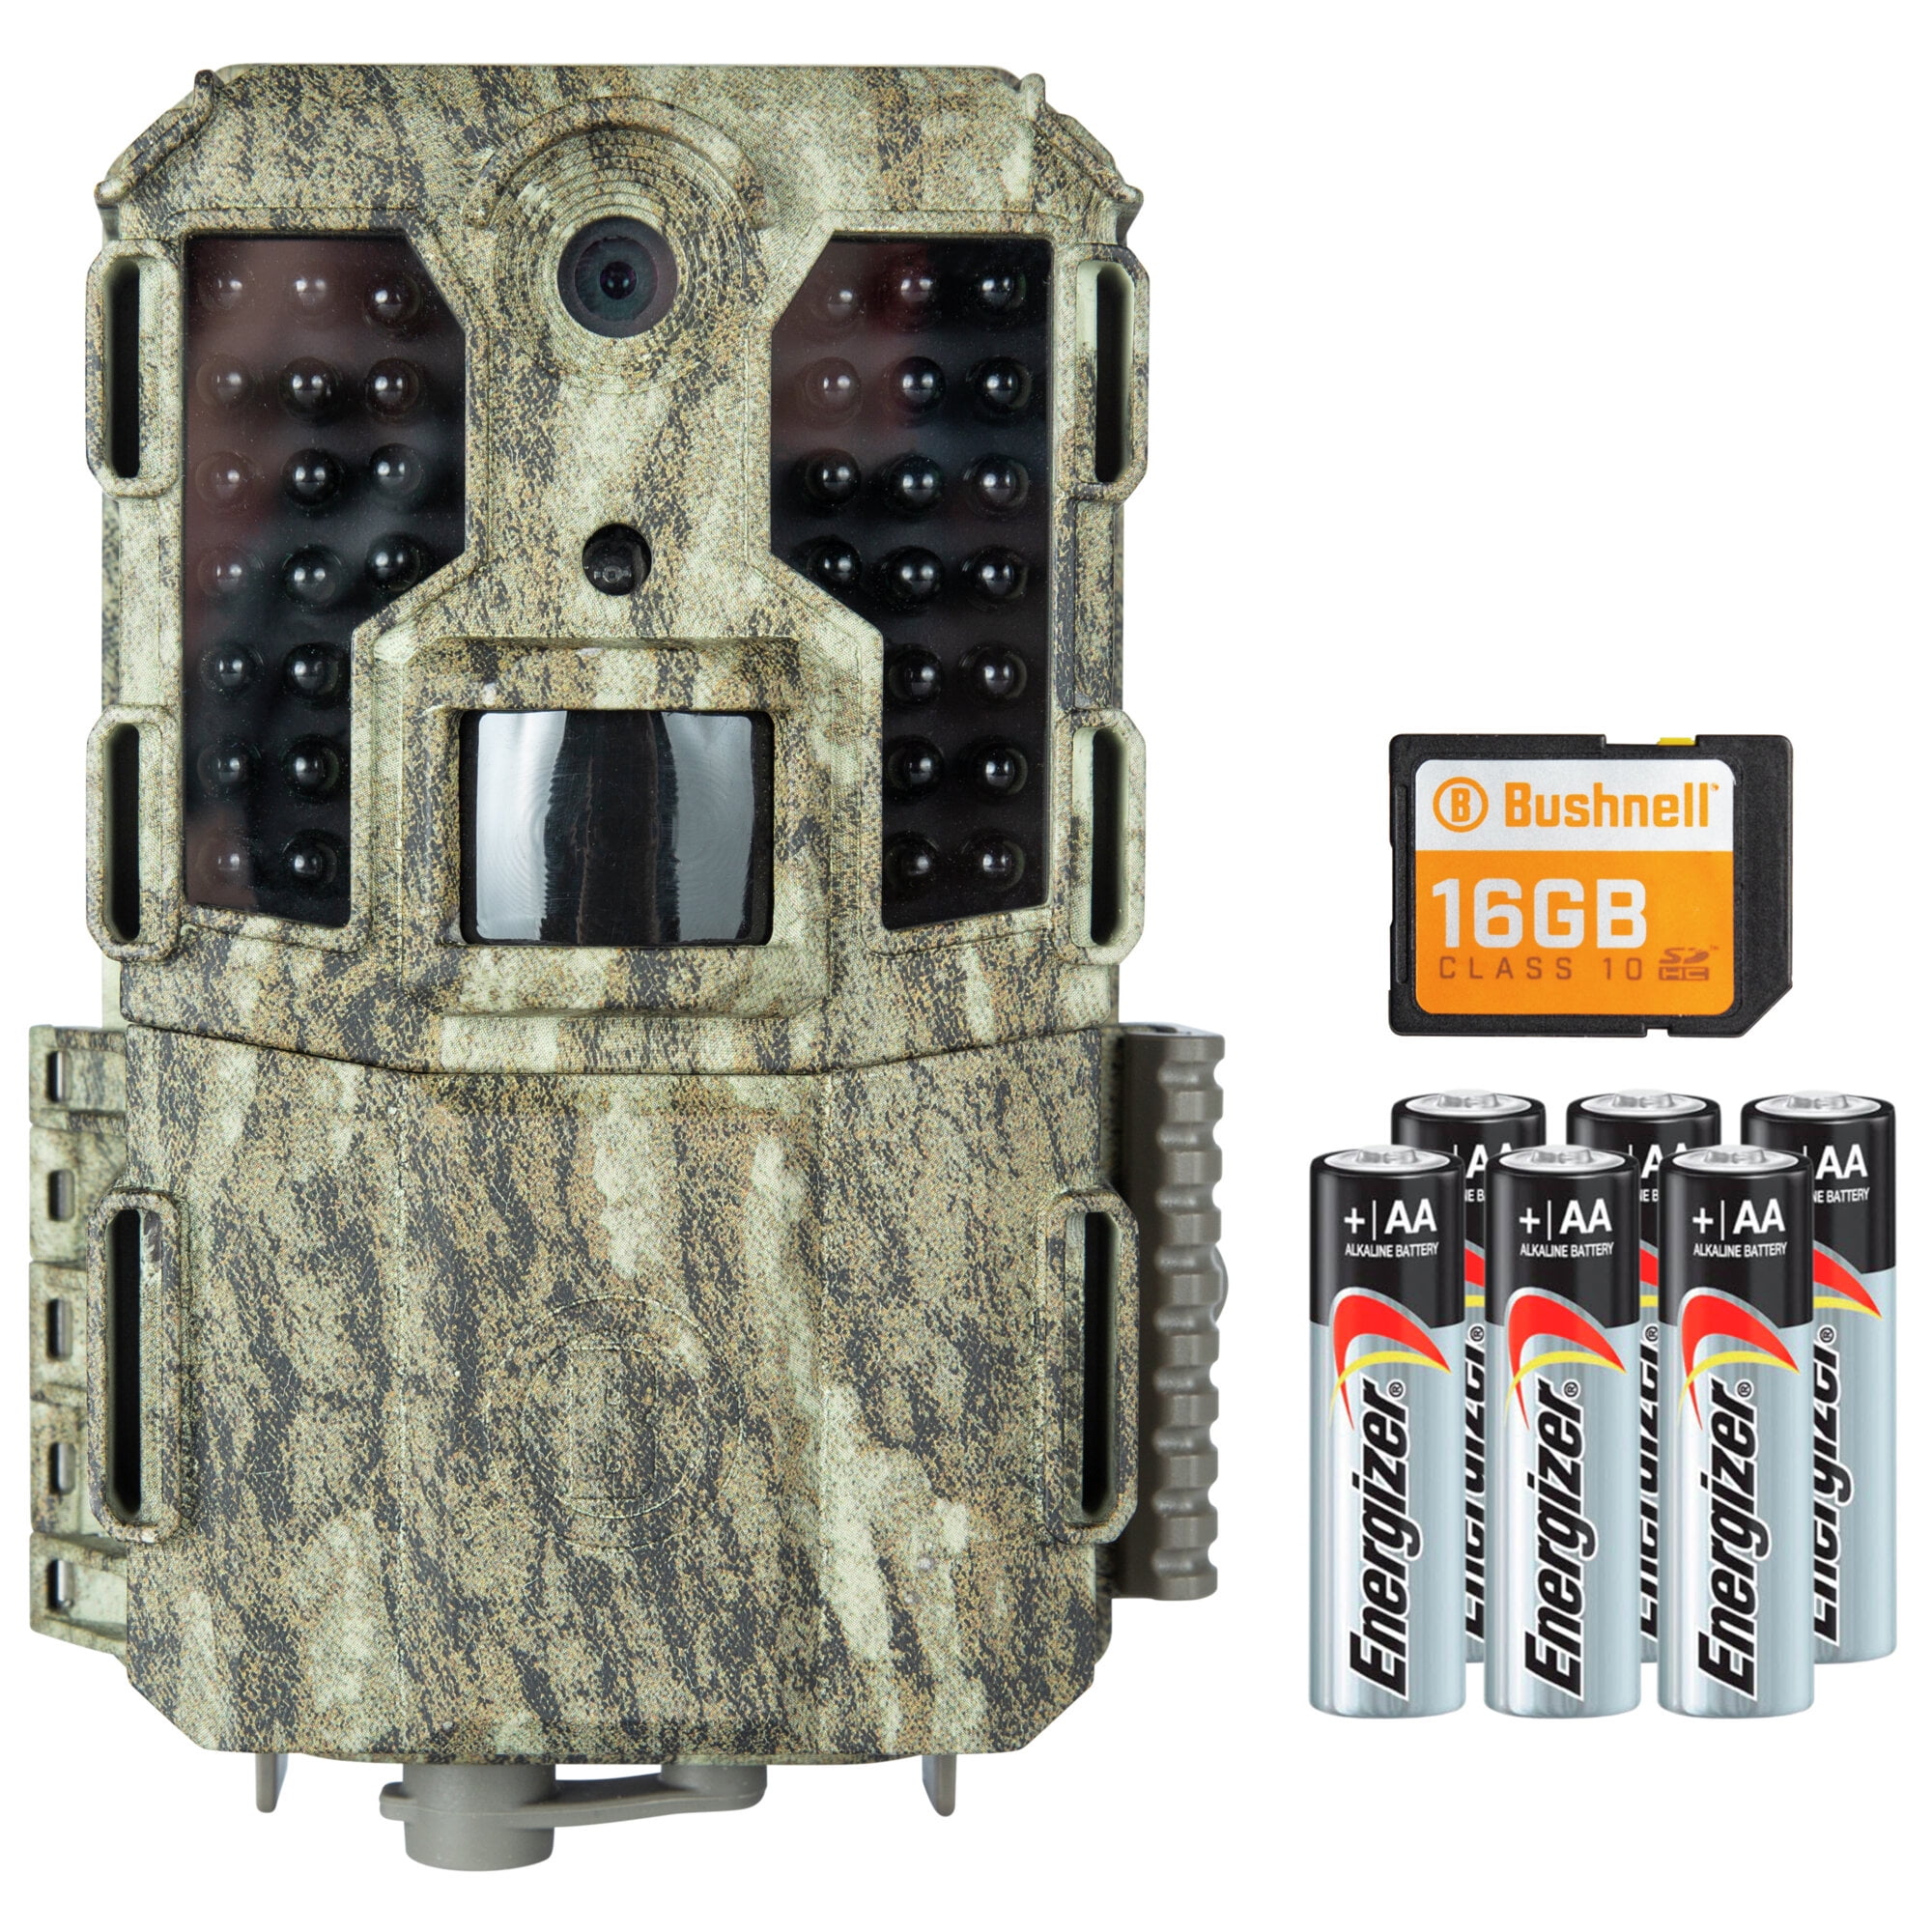 WGICM0724 - New! Wildgame Terra Extreme Lightsout 18MP 60ft Trail Camera - 